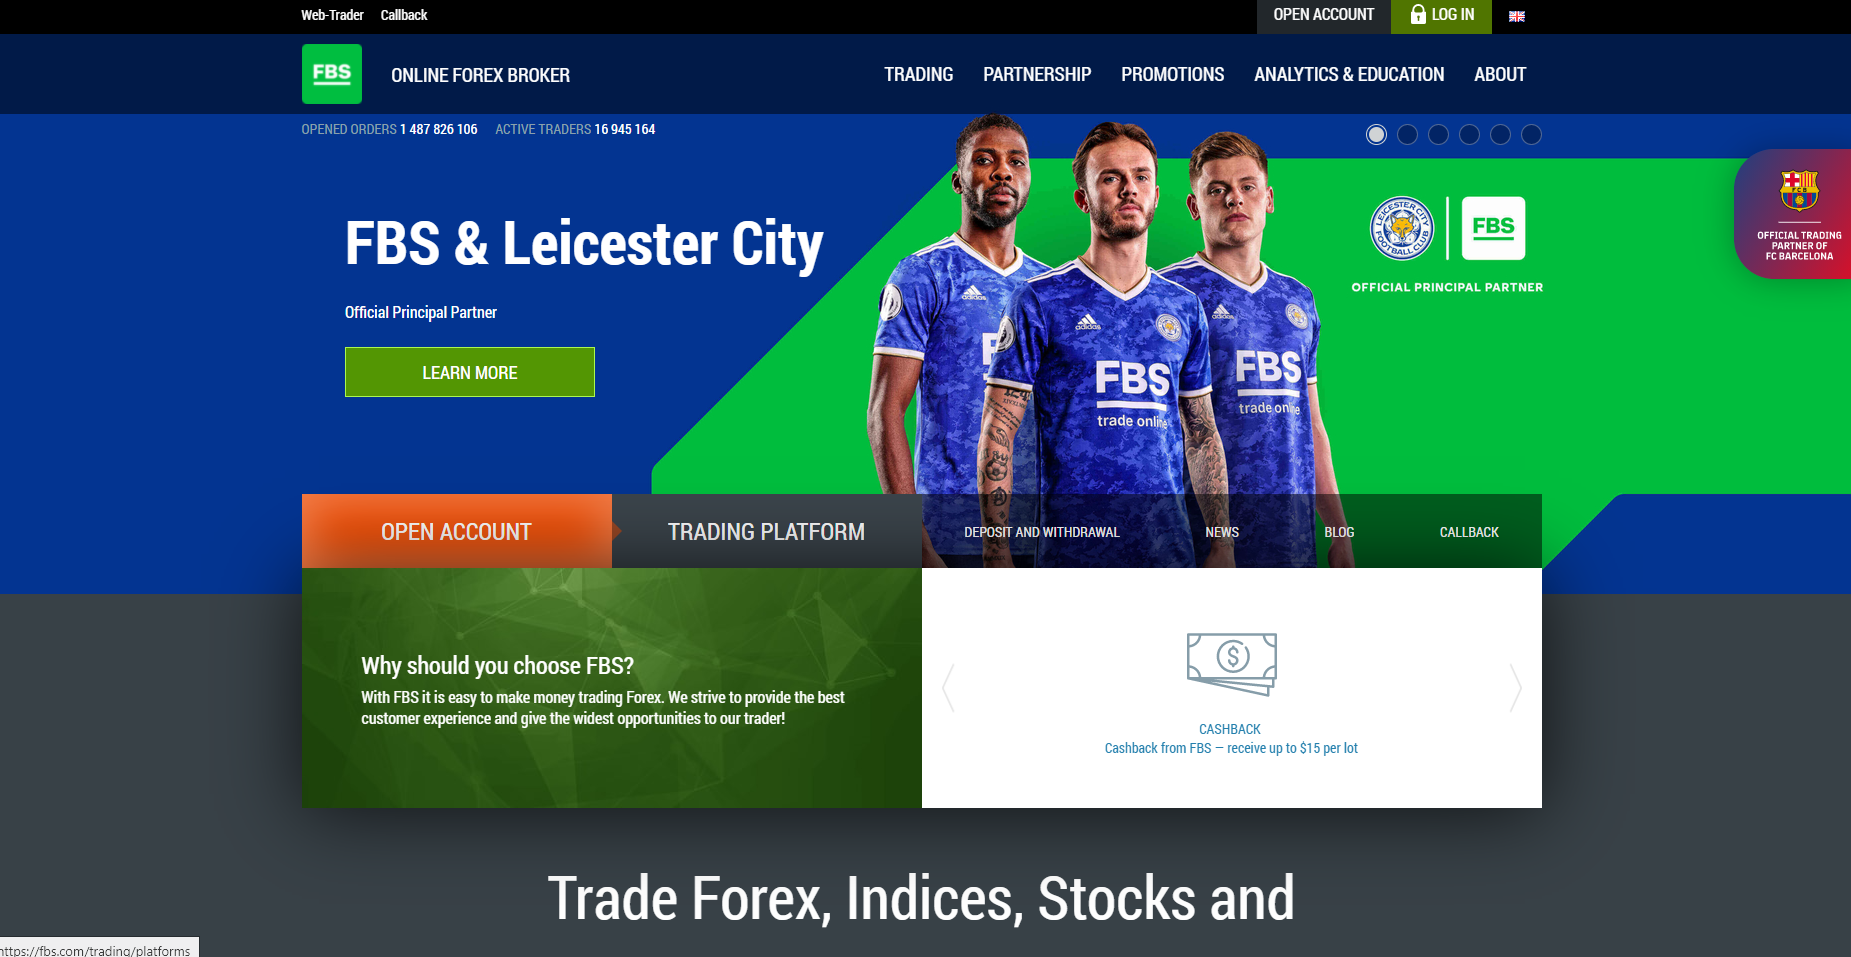 The official website of the forex broker FBS